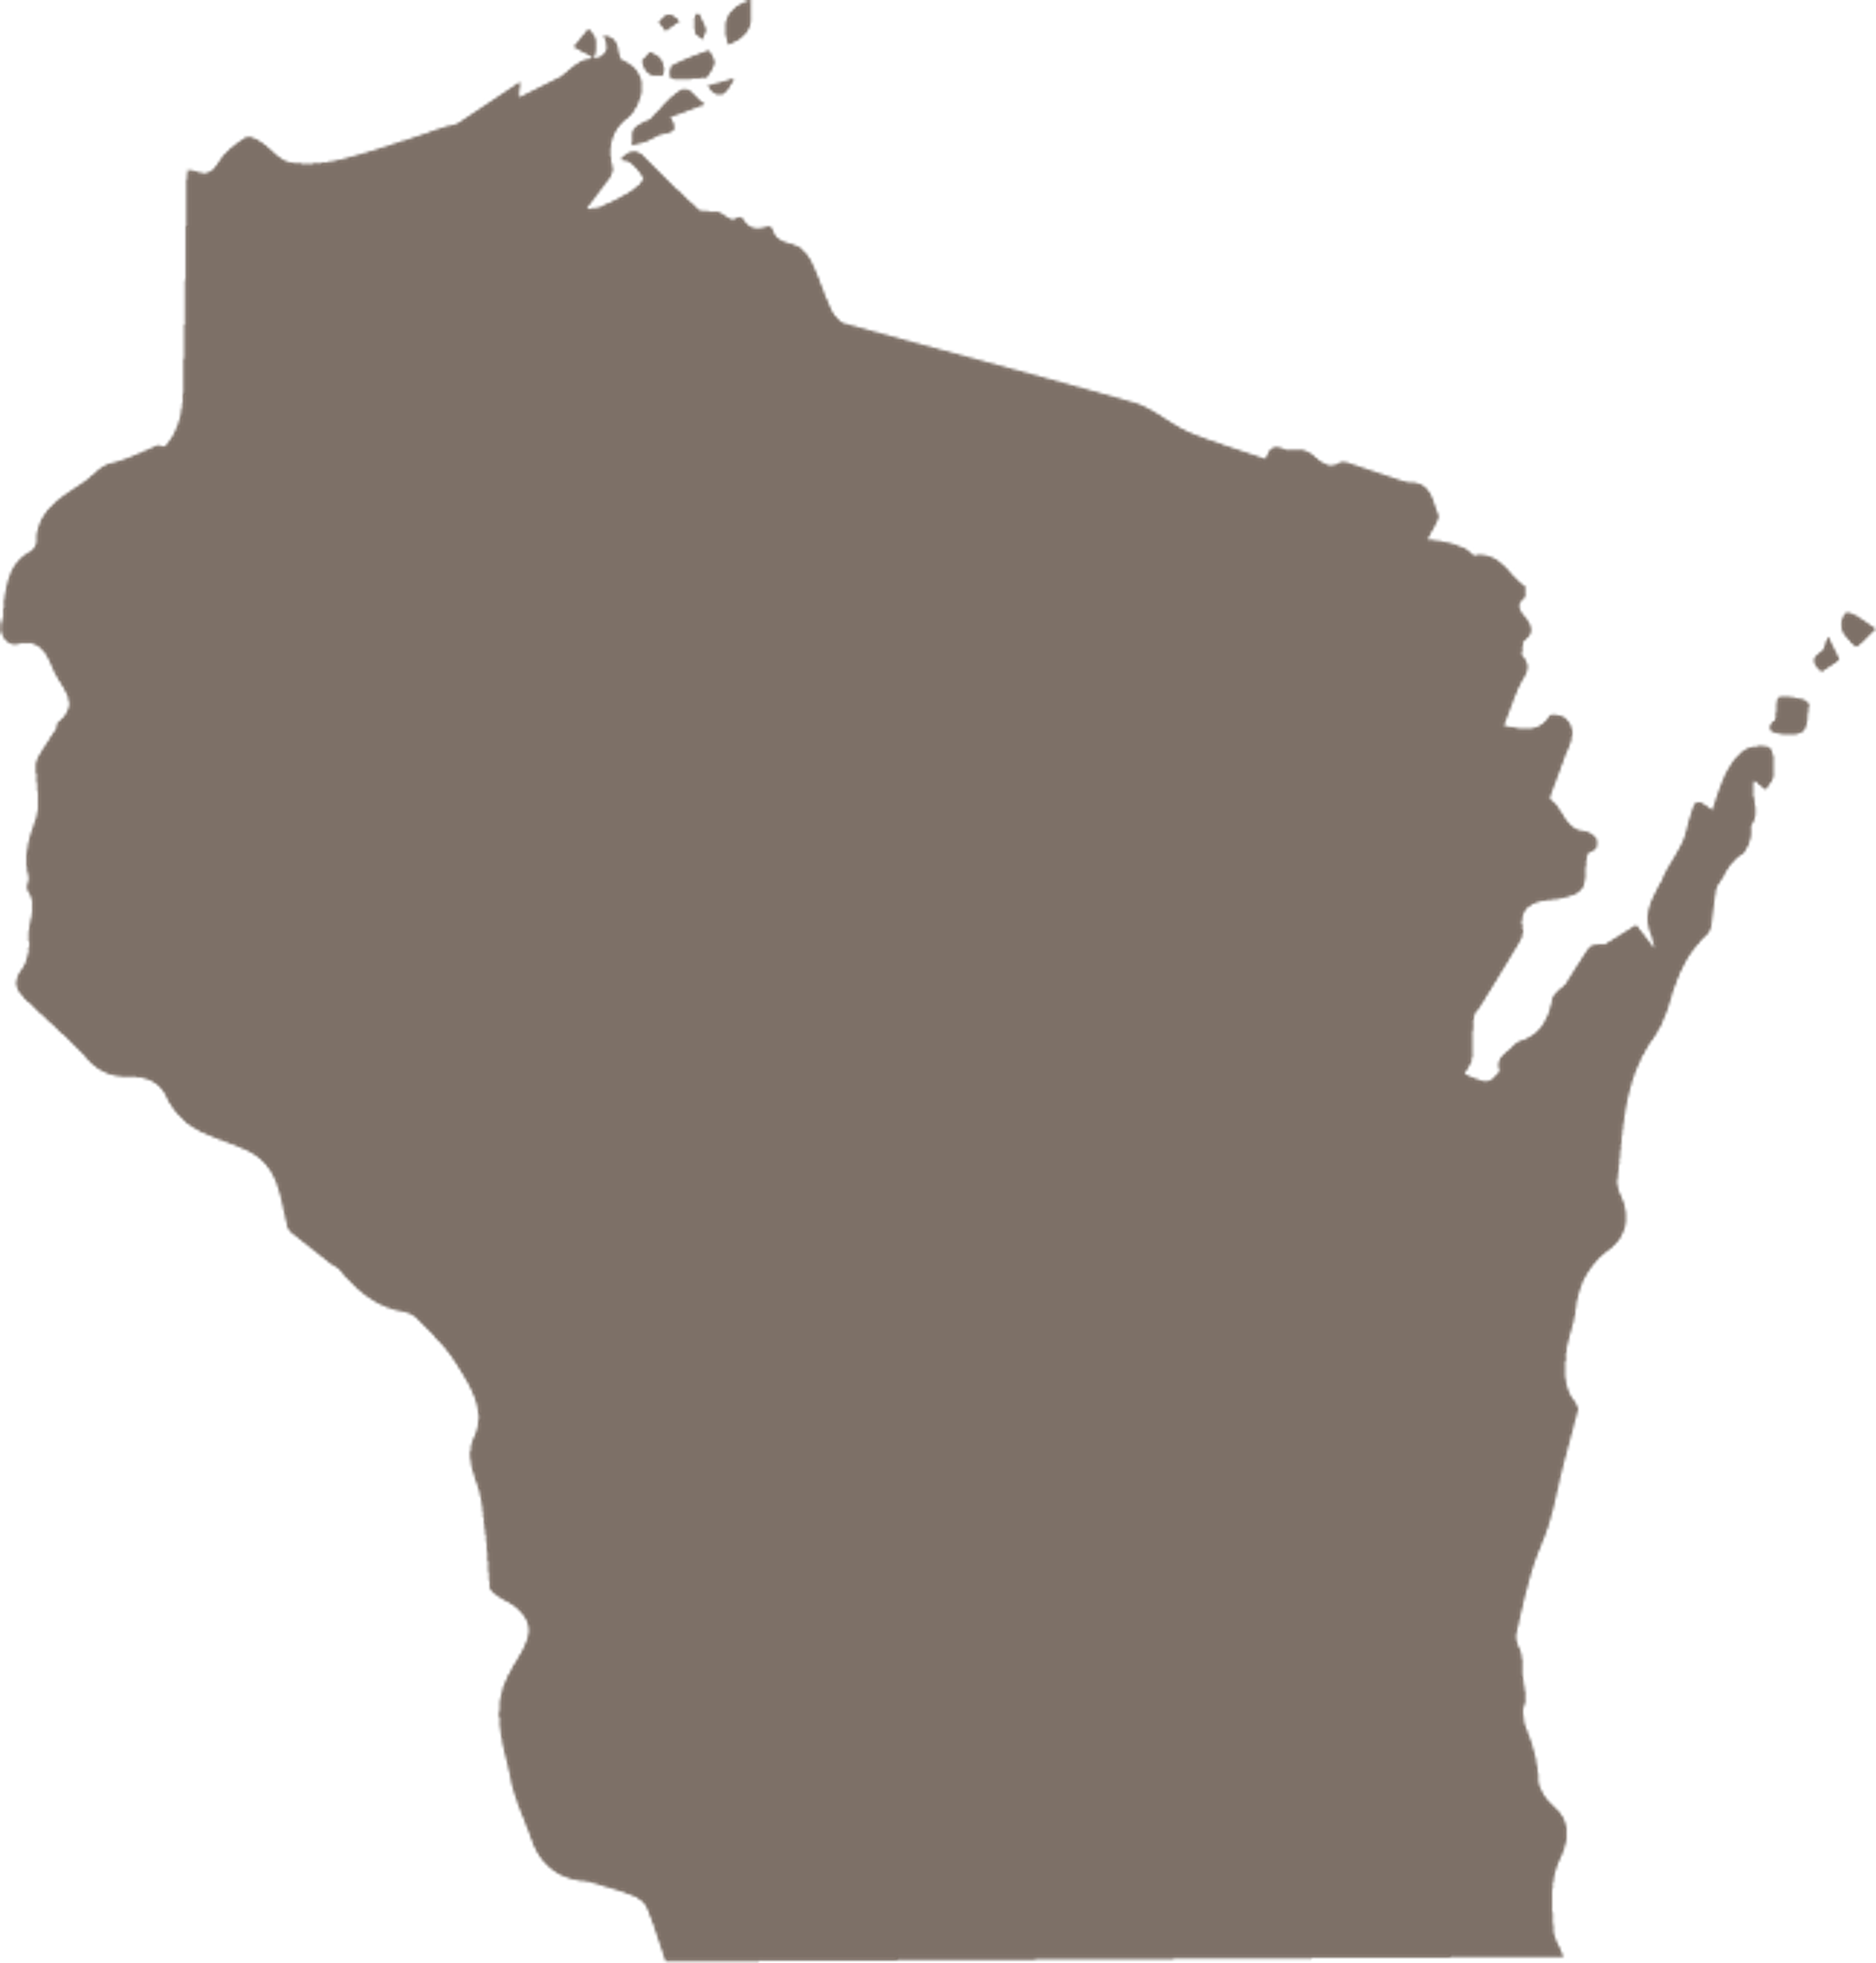 Wisconsin State Image